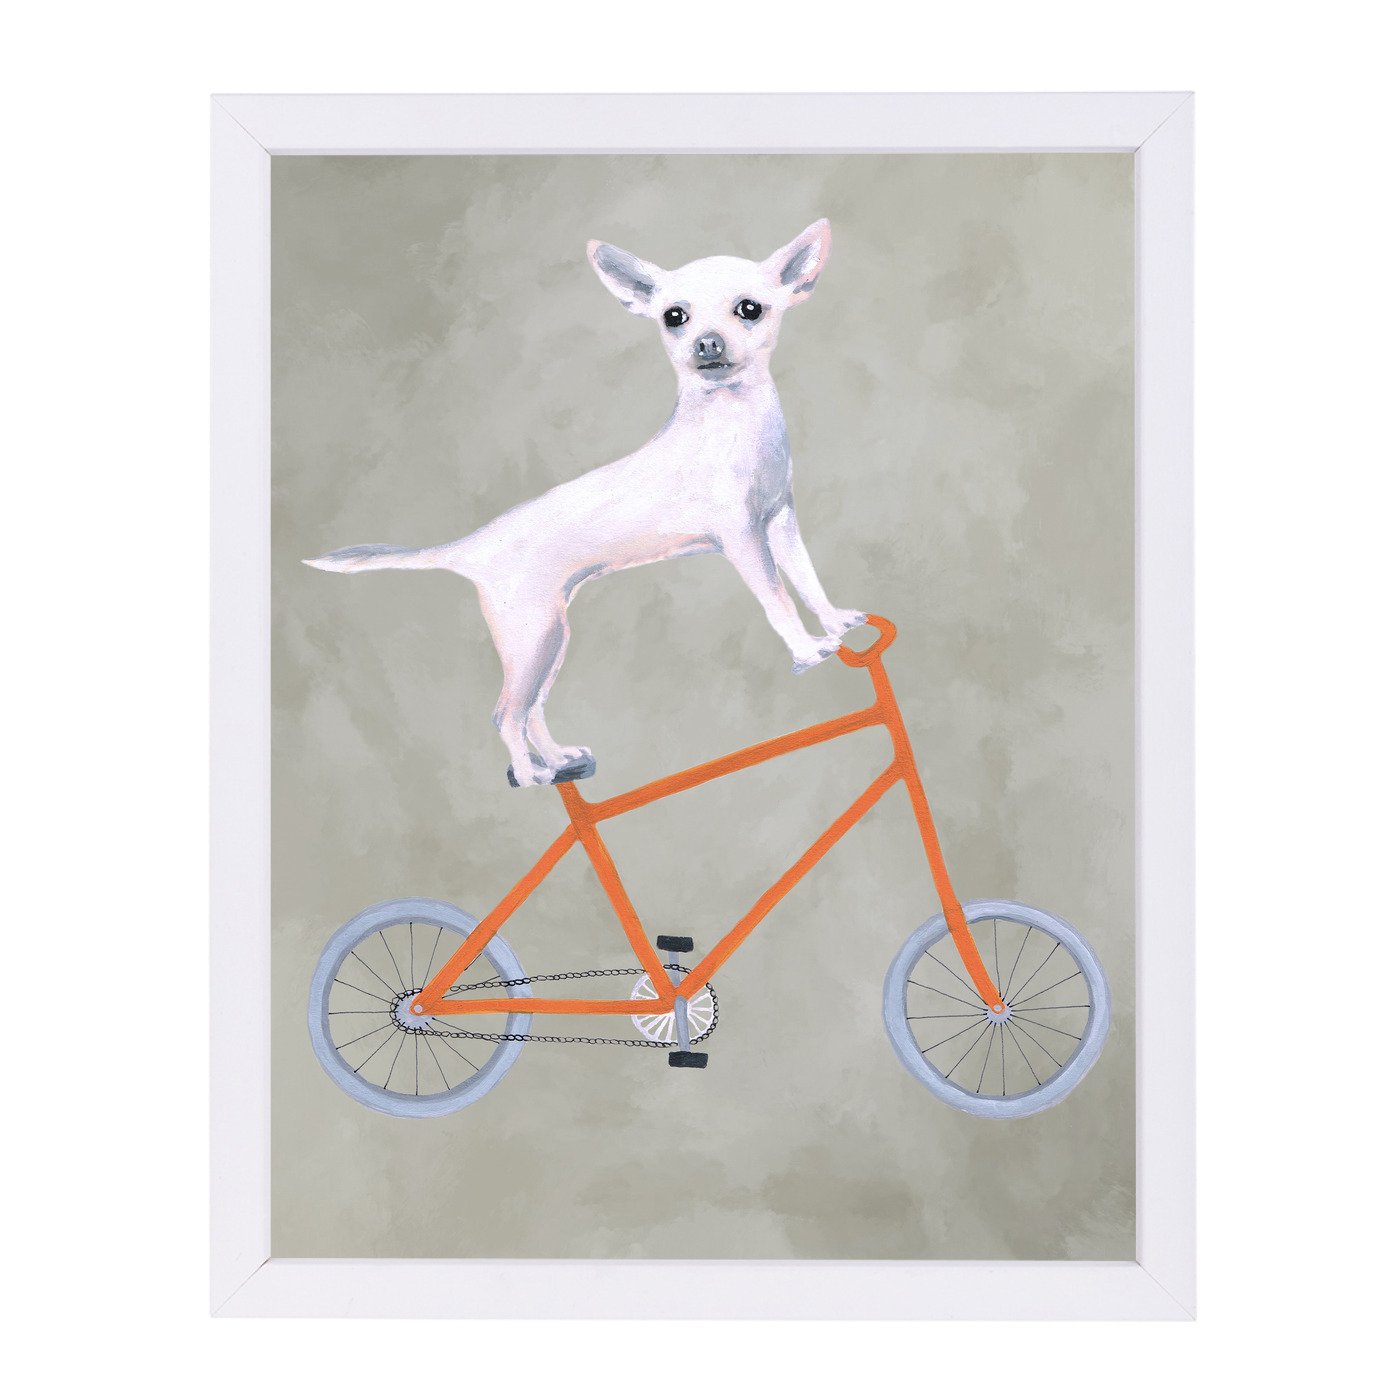 Chihuahua On Bicycle By Coco De Paris - Framed Print - Americanflat